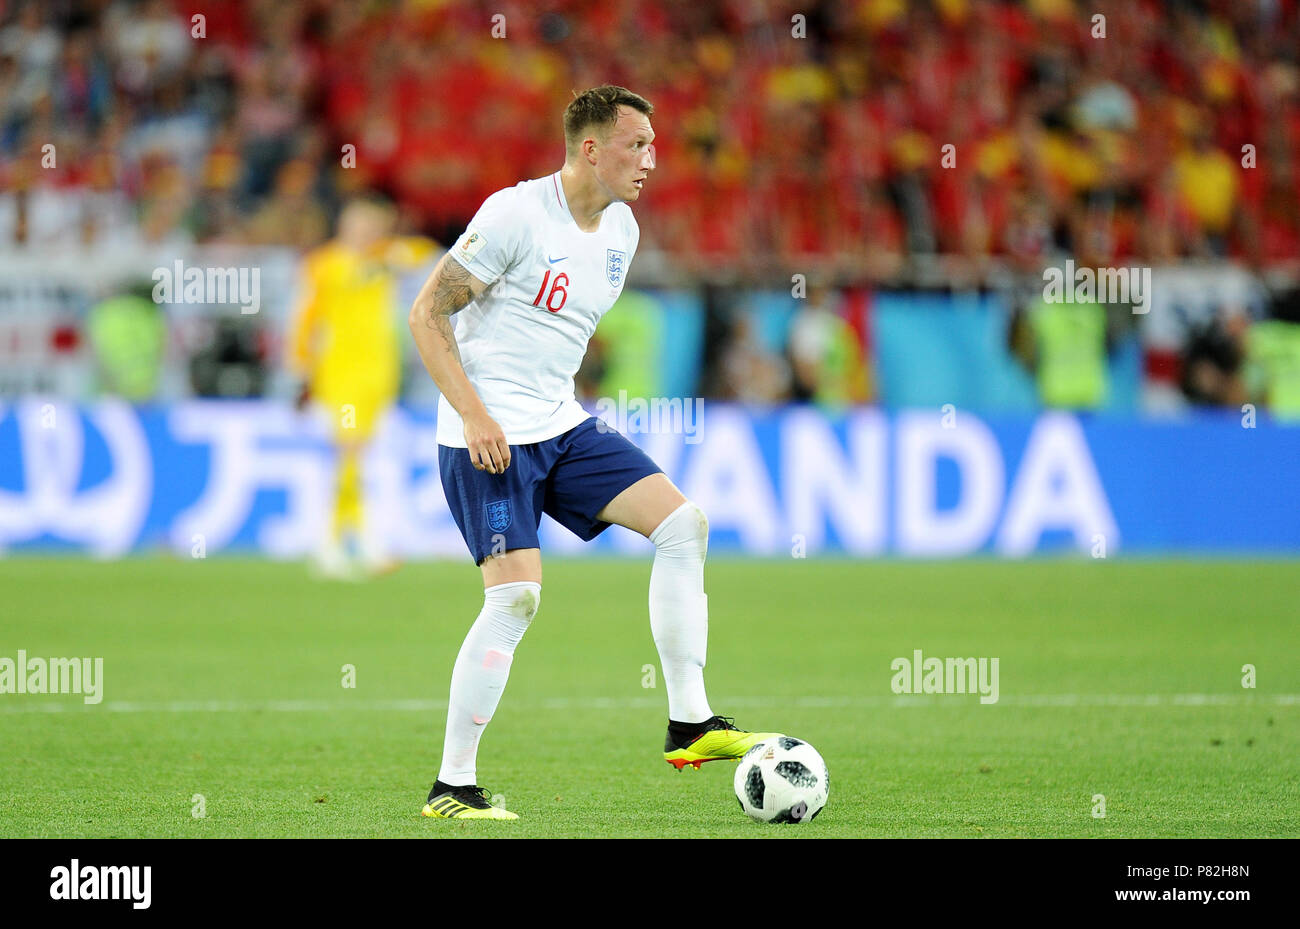 KALININGRAD, RUSSIA - JUNE 28: Phil Jones of England in action during the 2018 FIFA World Cup Russia group G match between England and Belgium at Kaliningrad Stadium on June 28, 2018 in Kaliningrad, Russia. (Photo by Norbert Barczyk/PressFocus/MB Media/) Stock Photo